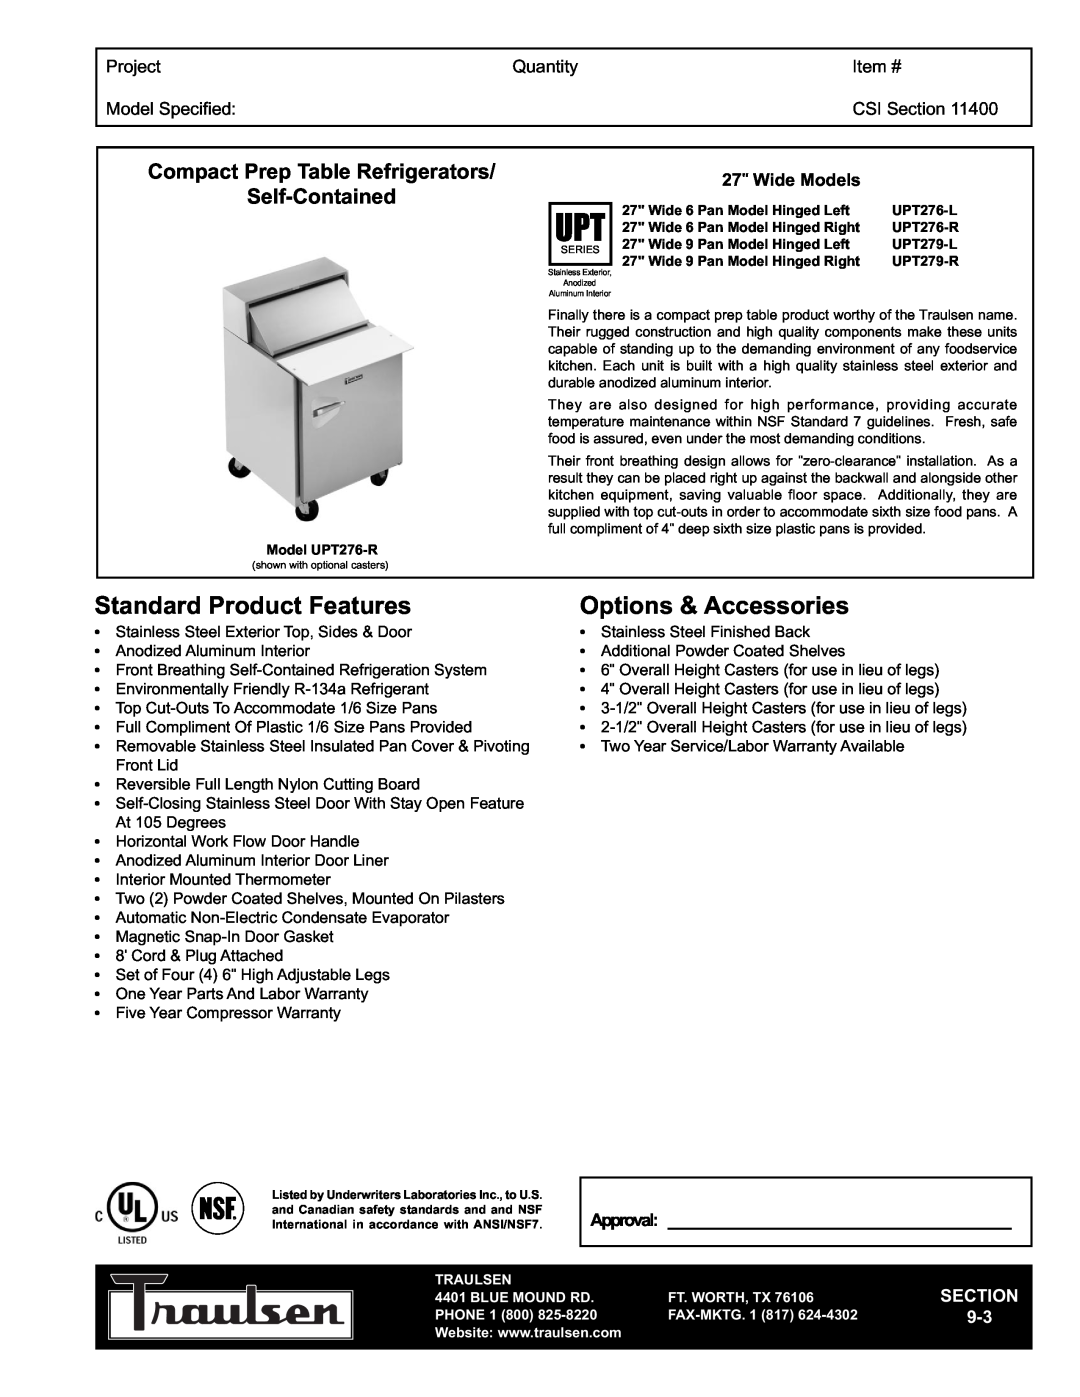 Traulsen UPT276-L warranty Compact Prep Table Refrigerators Self-Contained, Project, Quantity, Item #, Model Specified 